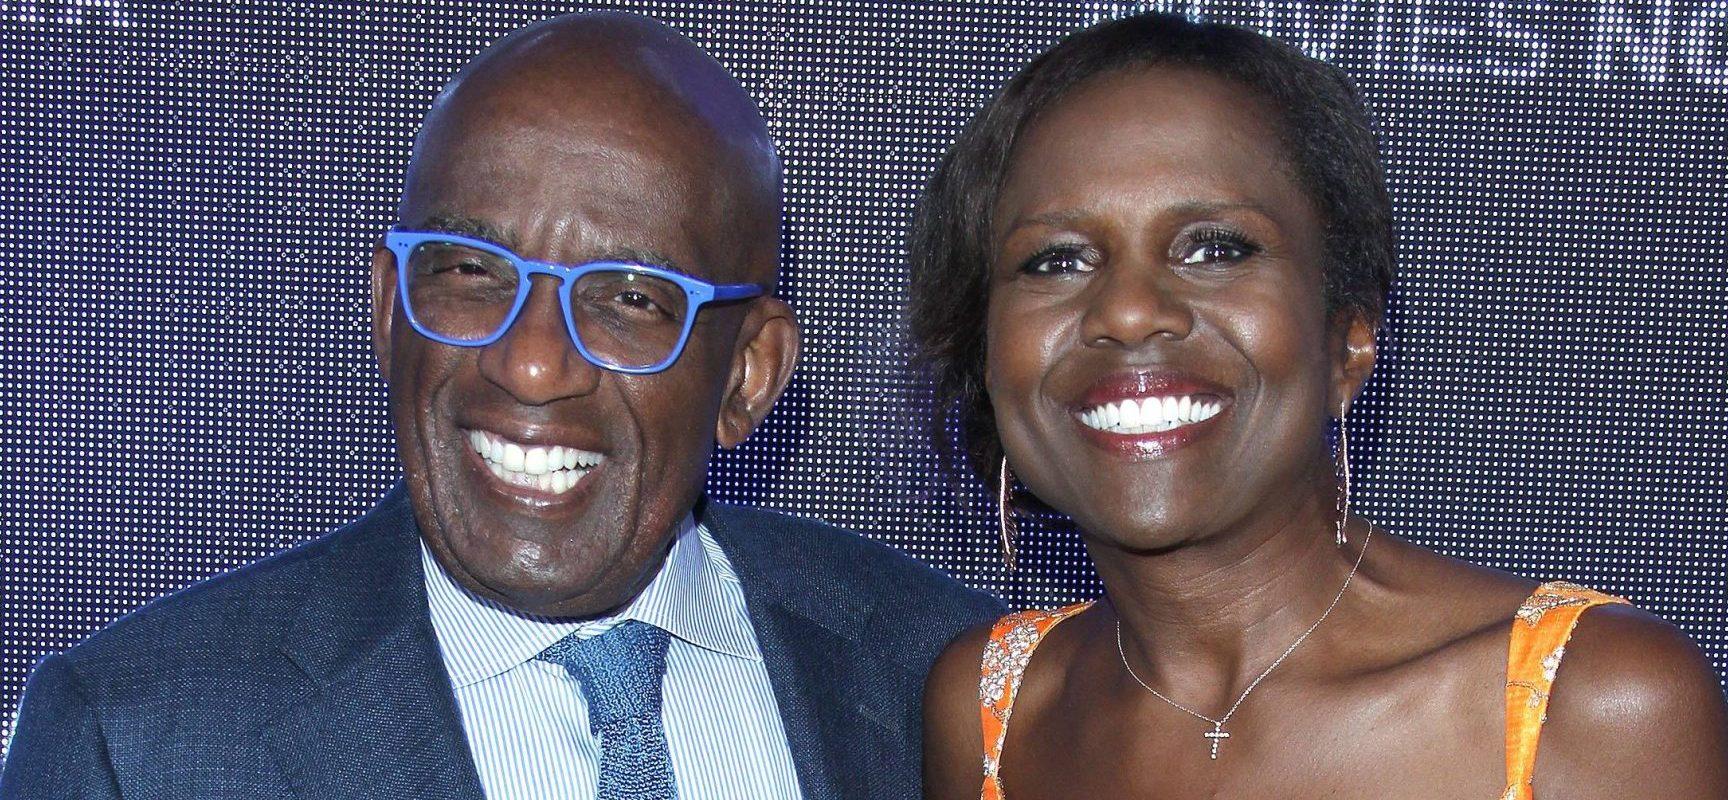 Al Roker’s Wife Deborah Opens Up About Experience As Caregiver To Her Husband